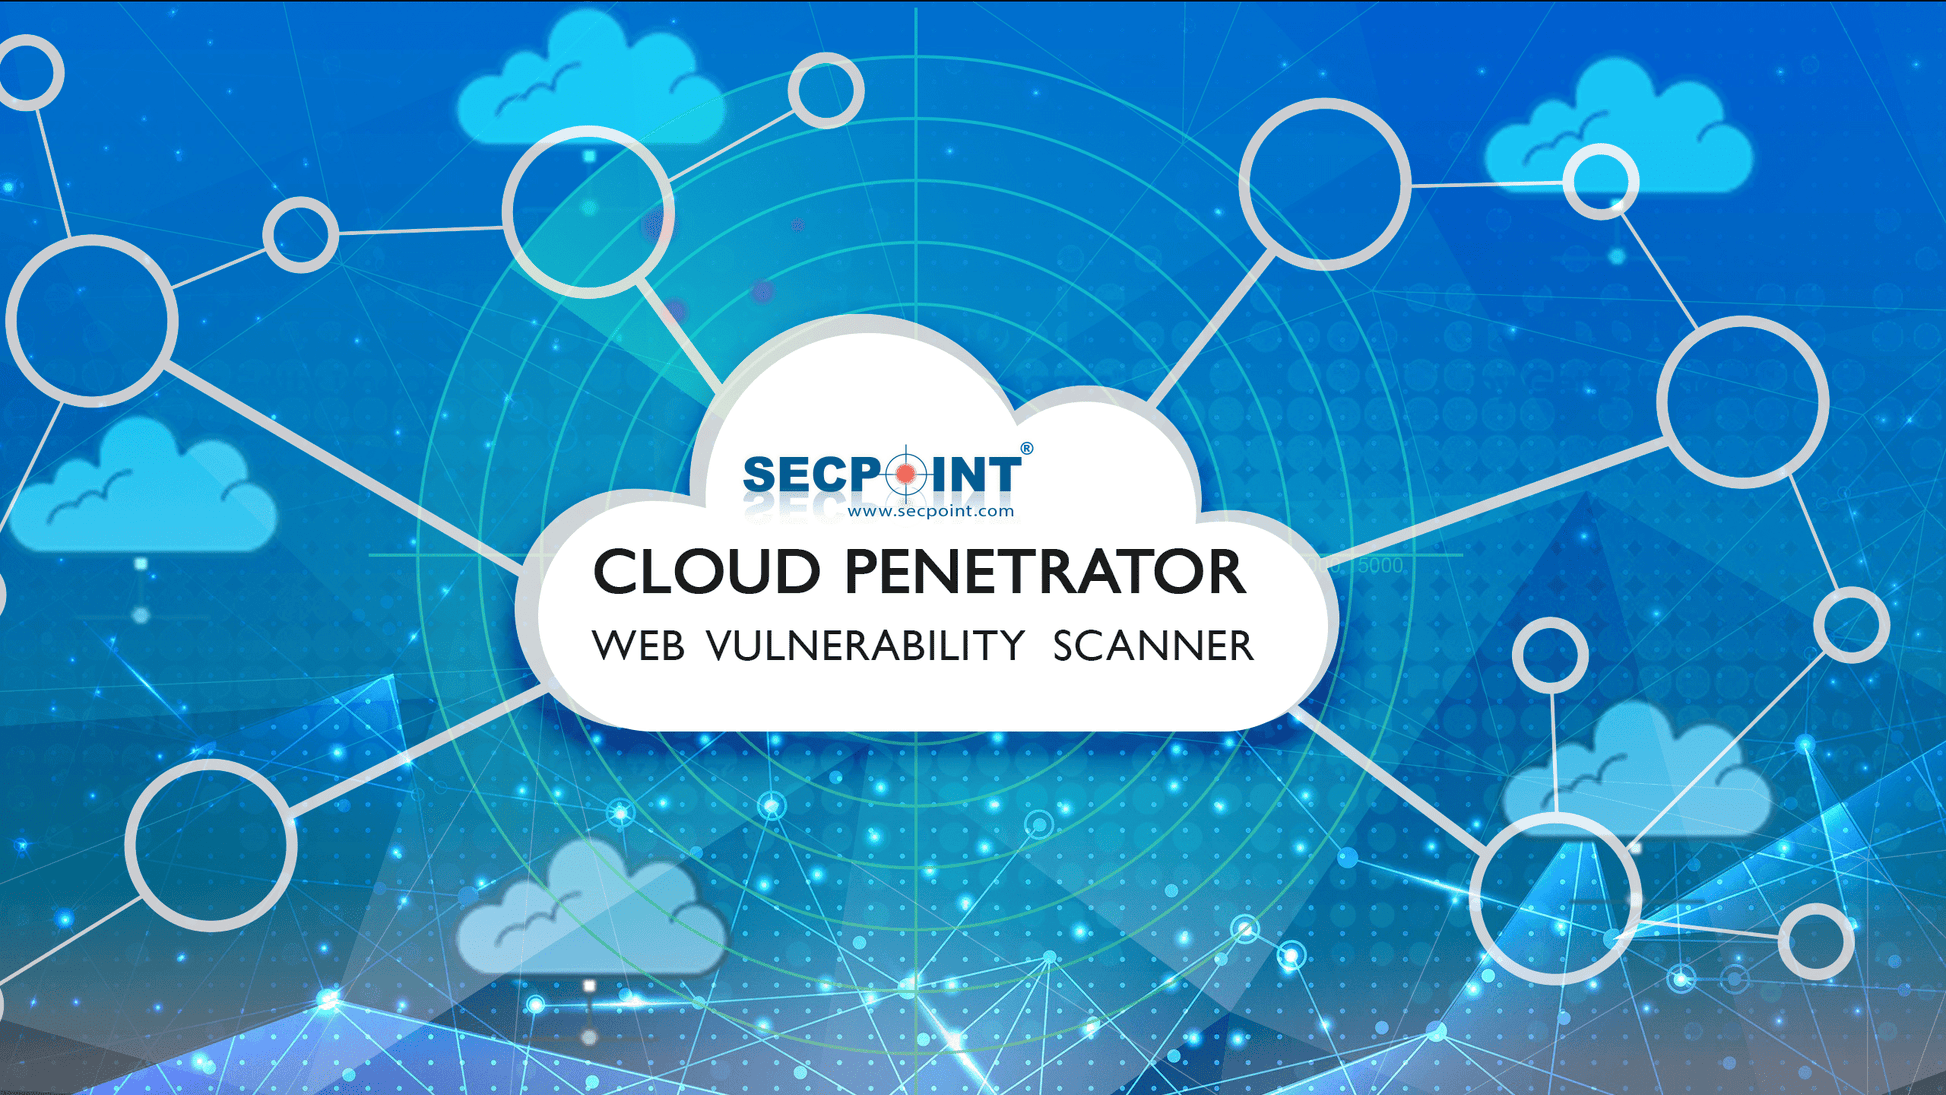 SecPoint Cloud Penetrator S9 - Vulnerability scanning of 2 IPs for 3 Years Static Scan License - SecPoint